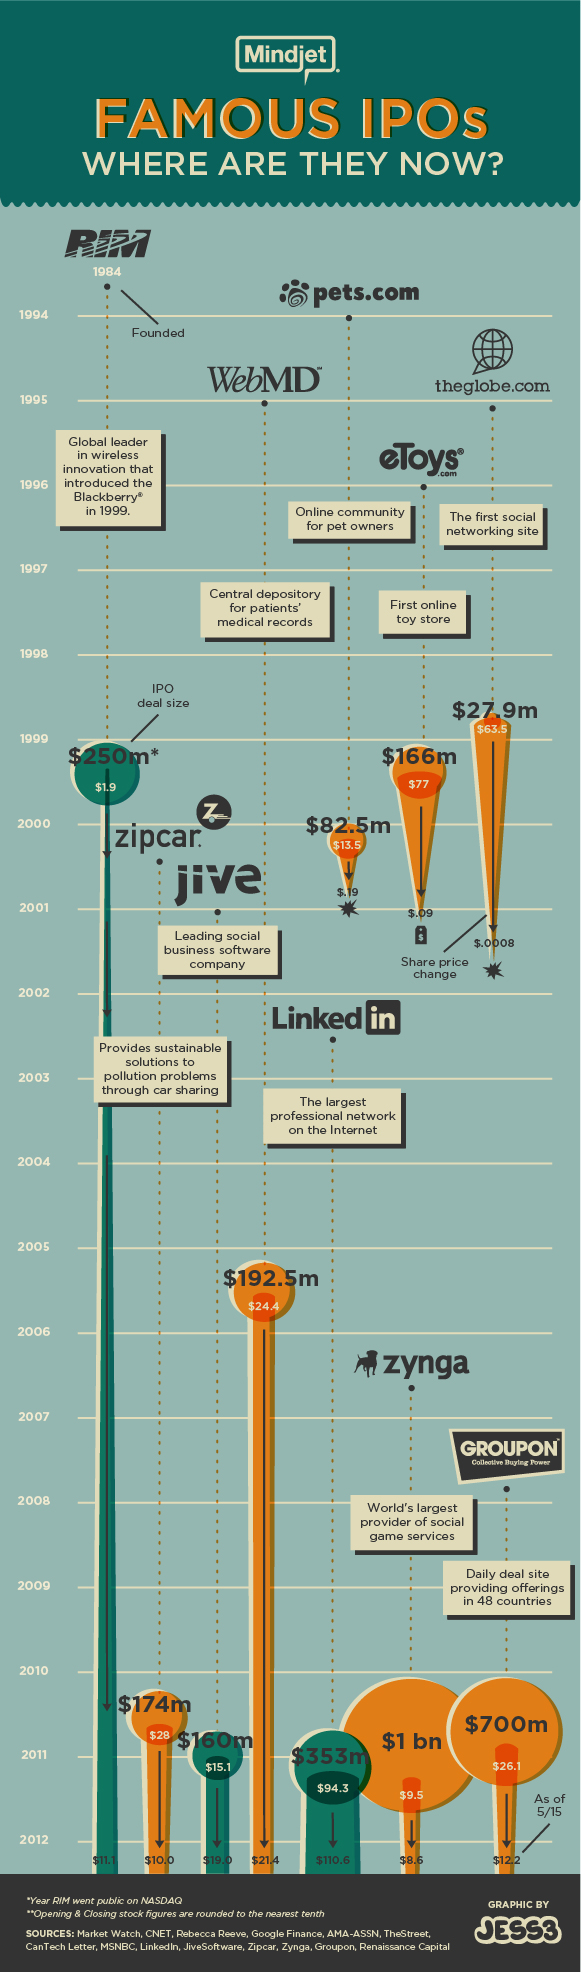 Famous IPOs: Where Are They Now?